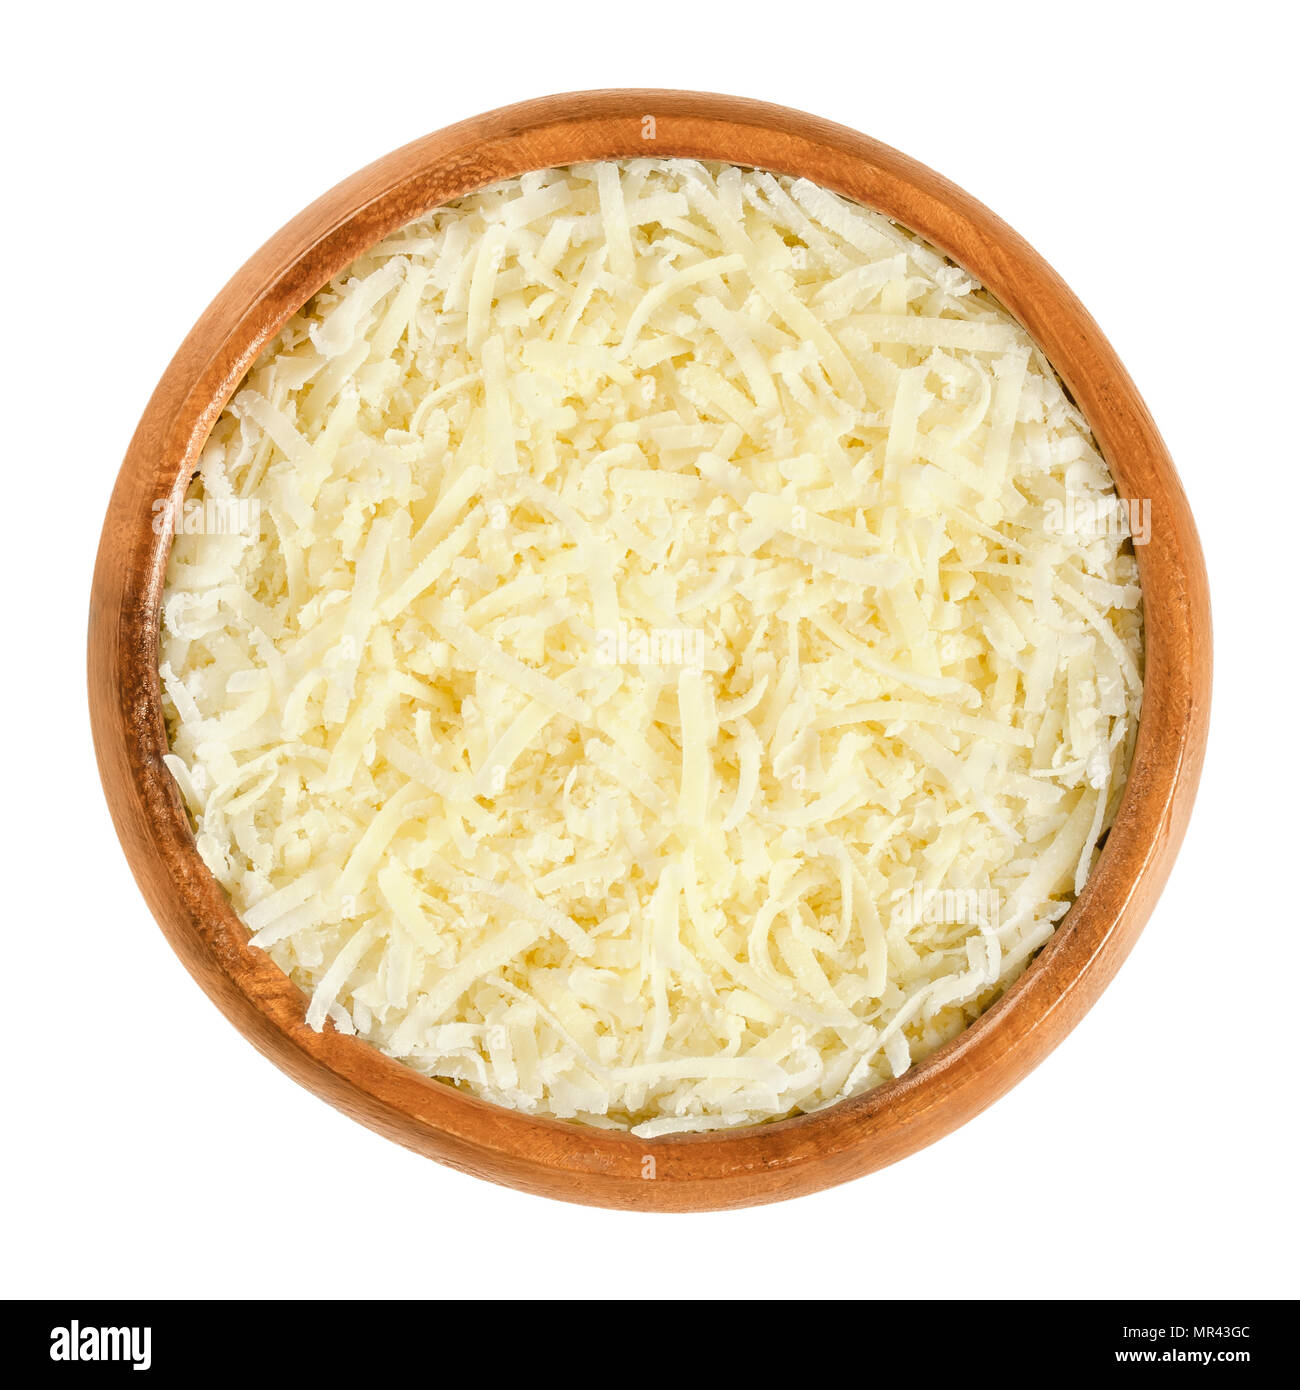 Grated Parmesan cheese in wooden bowl. Parmigiano-Reggiano. Italian hard, granular cheese, of slightly yellow color, made of unpasteurized cow milk. Stock Photo